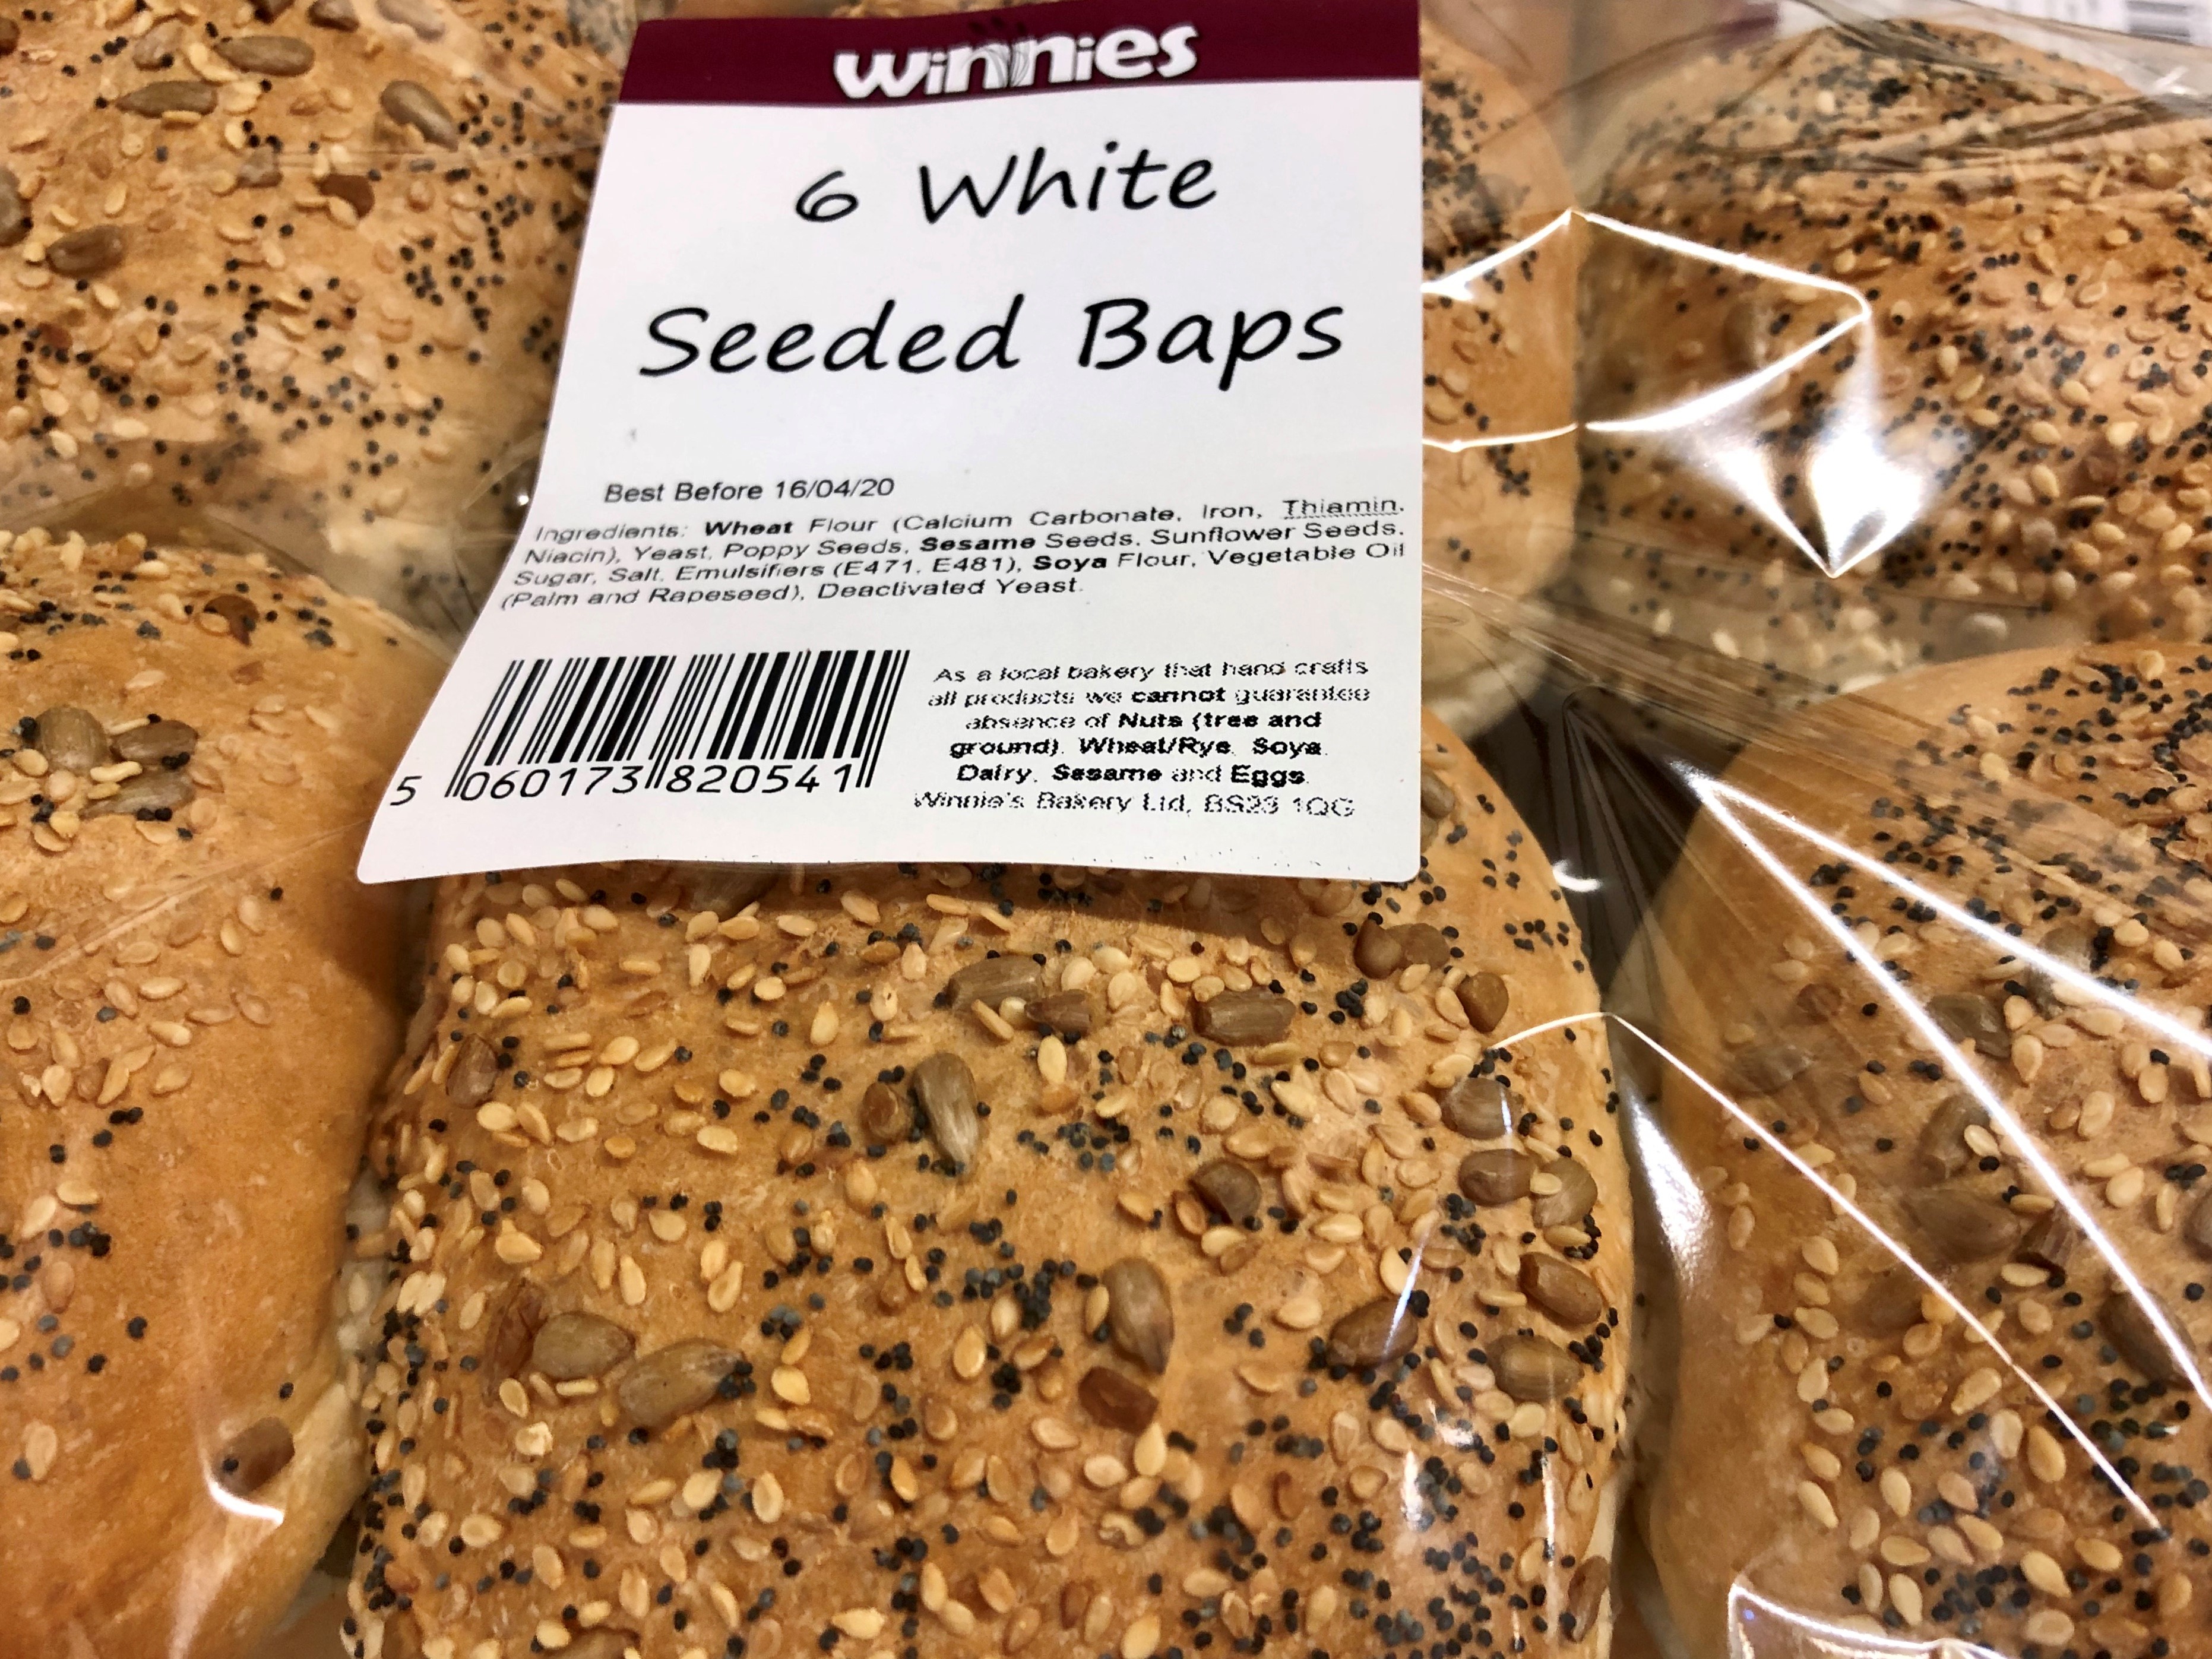 SIX SEEDED TOPPED WHITE BAPS